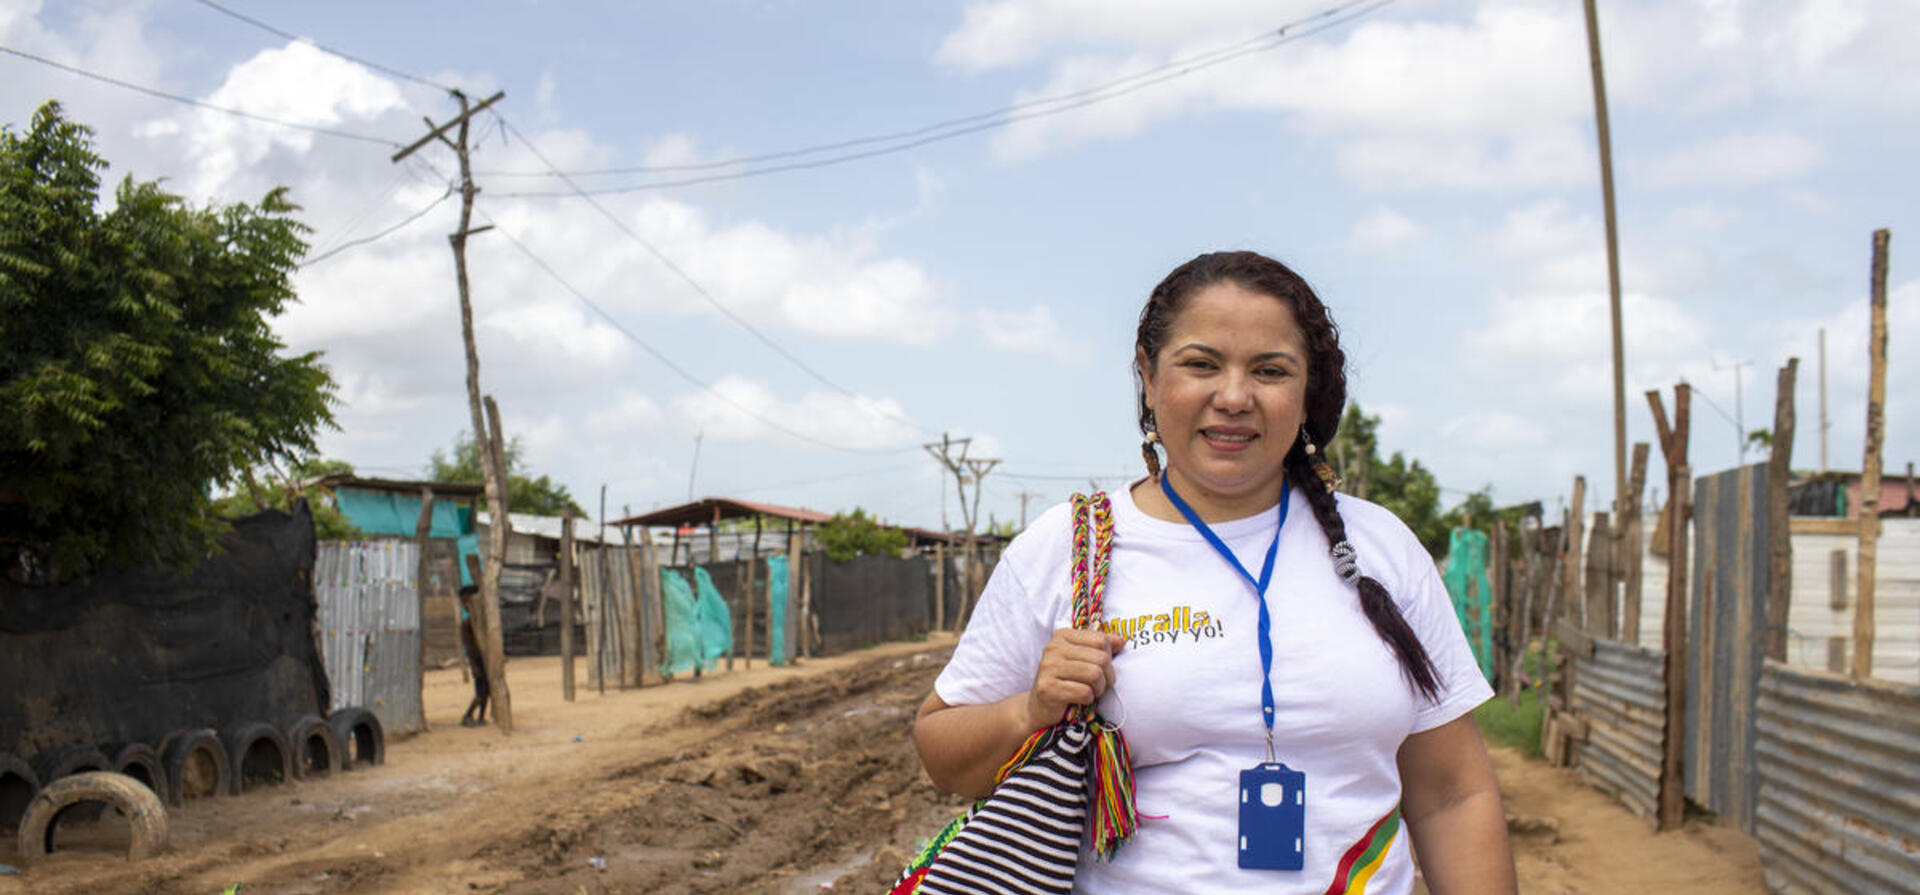 Colombian woman devotes life to helping sexually exploited children heal UNHCR picture